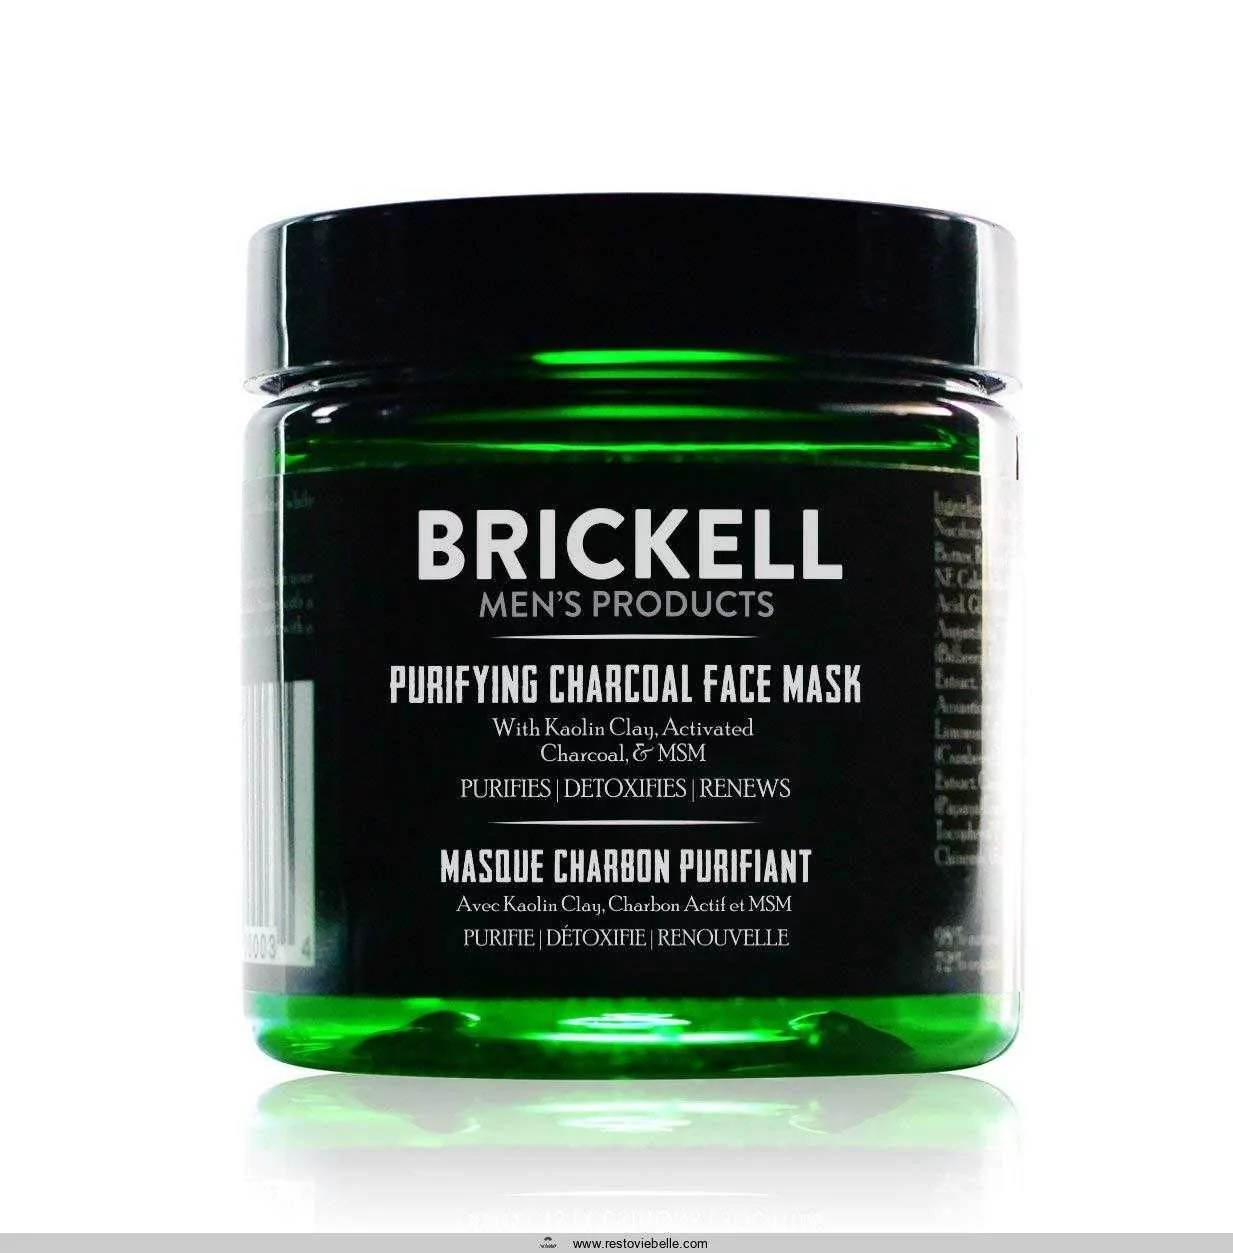 Brickell Men’s Purifying Charcoal Face Mask